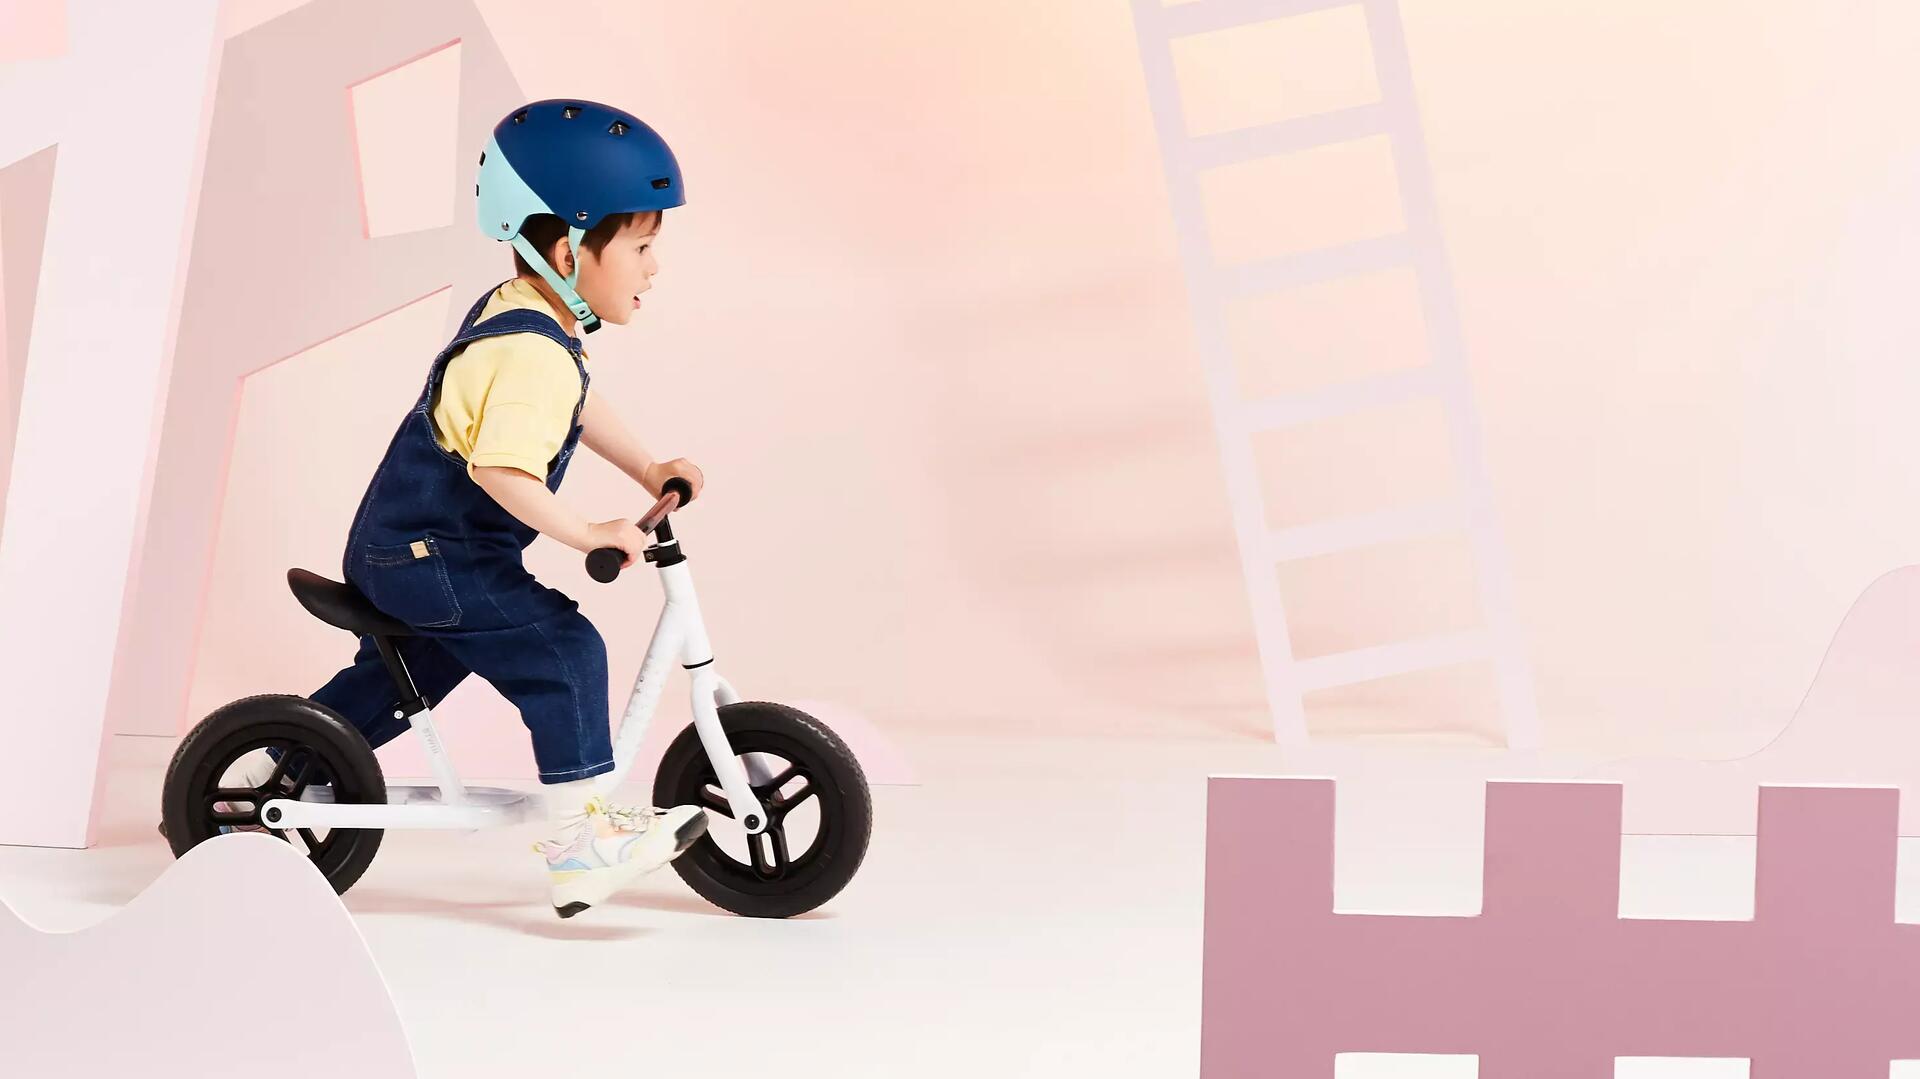 BALANCE BIKE OR TRICYCLE? HOW TO CHOOSE